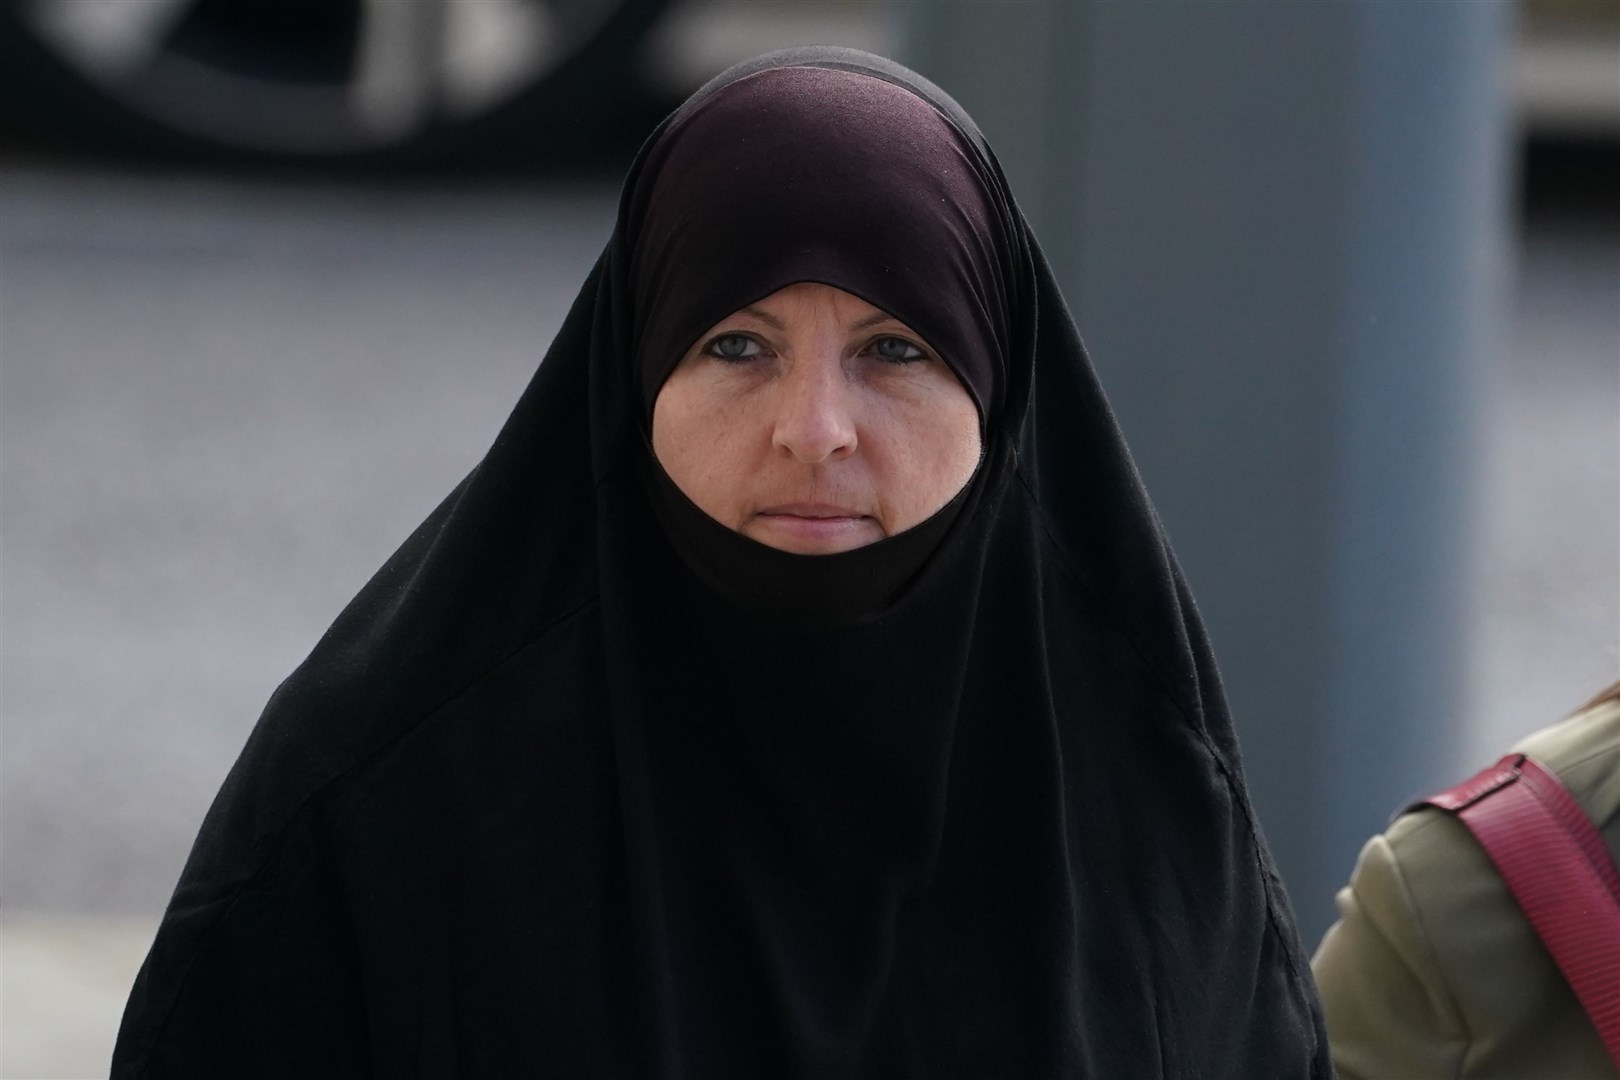 Lisa Smith was found guilty of IS membership after a trial at Dublin’s Special Criminal Court in May (Brian Lawless/PA)